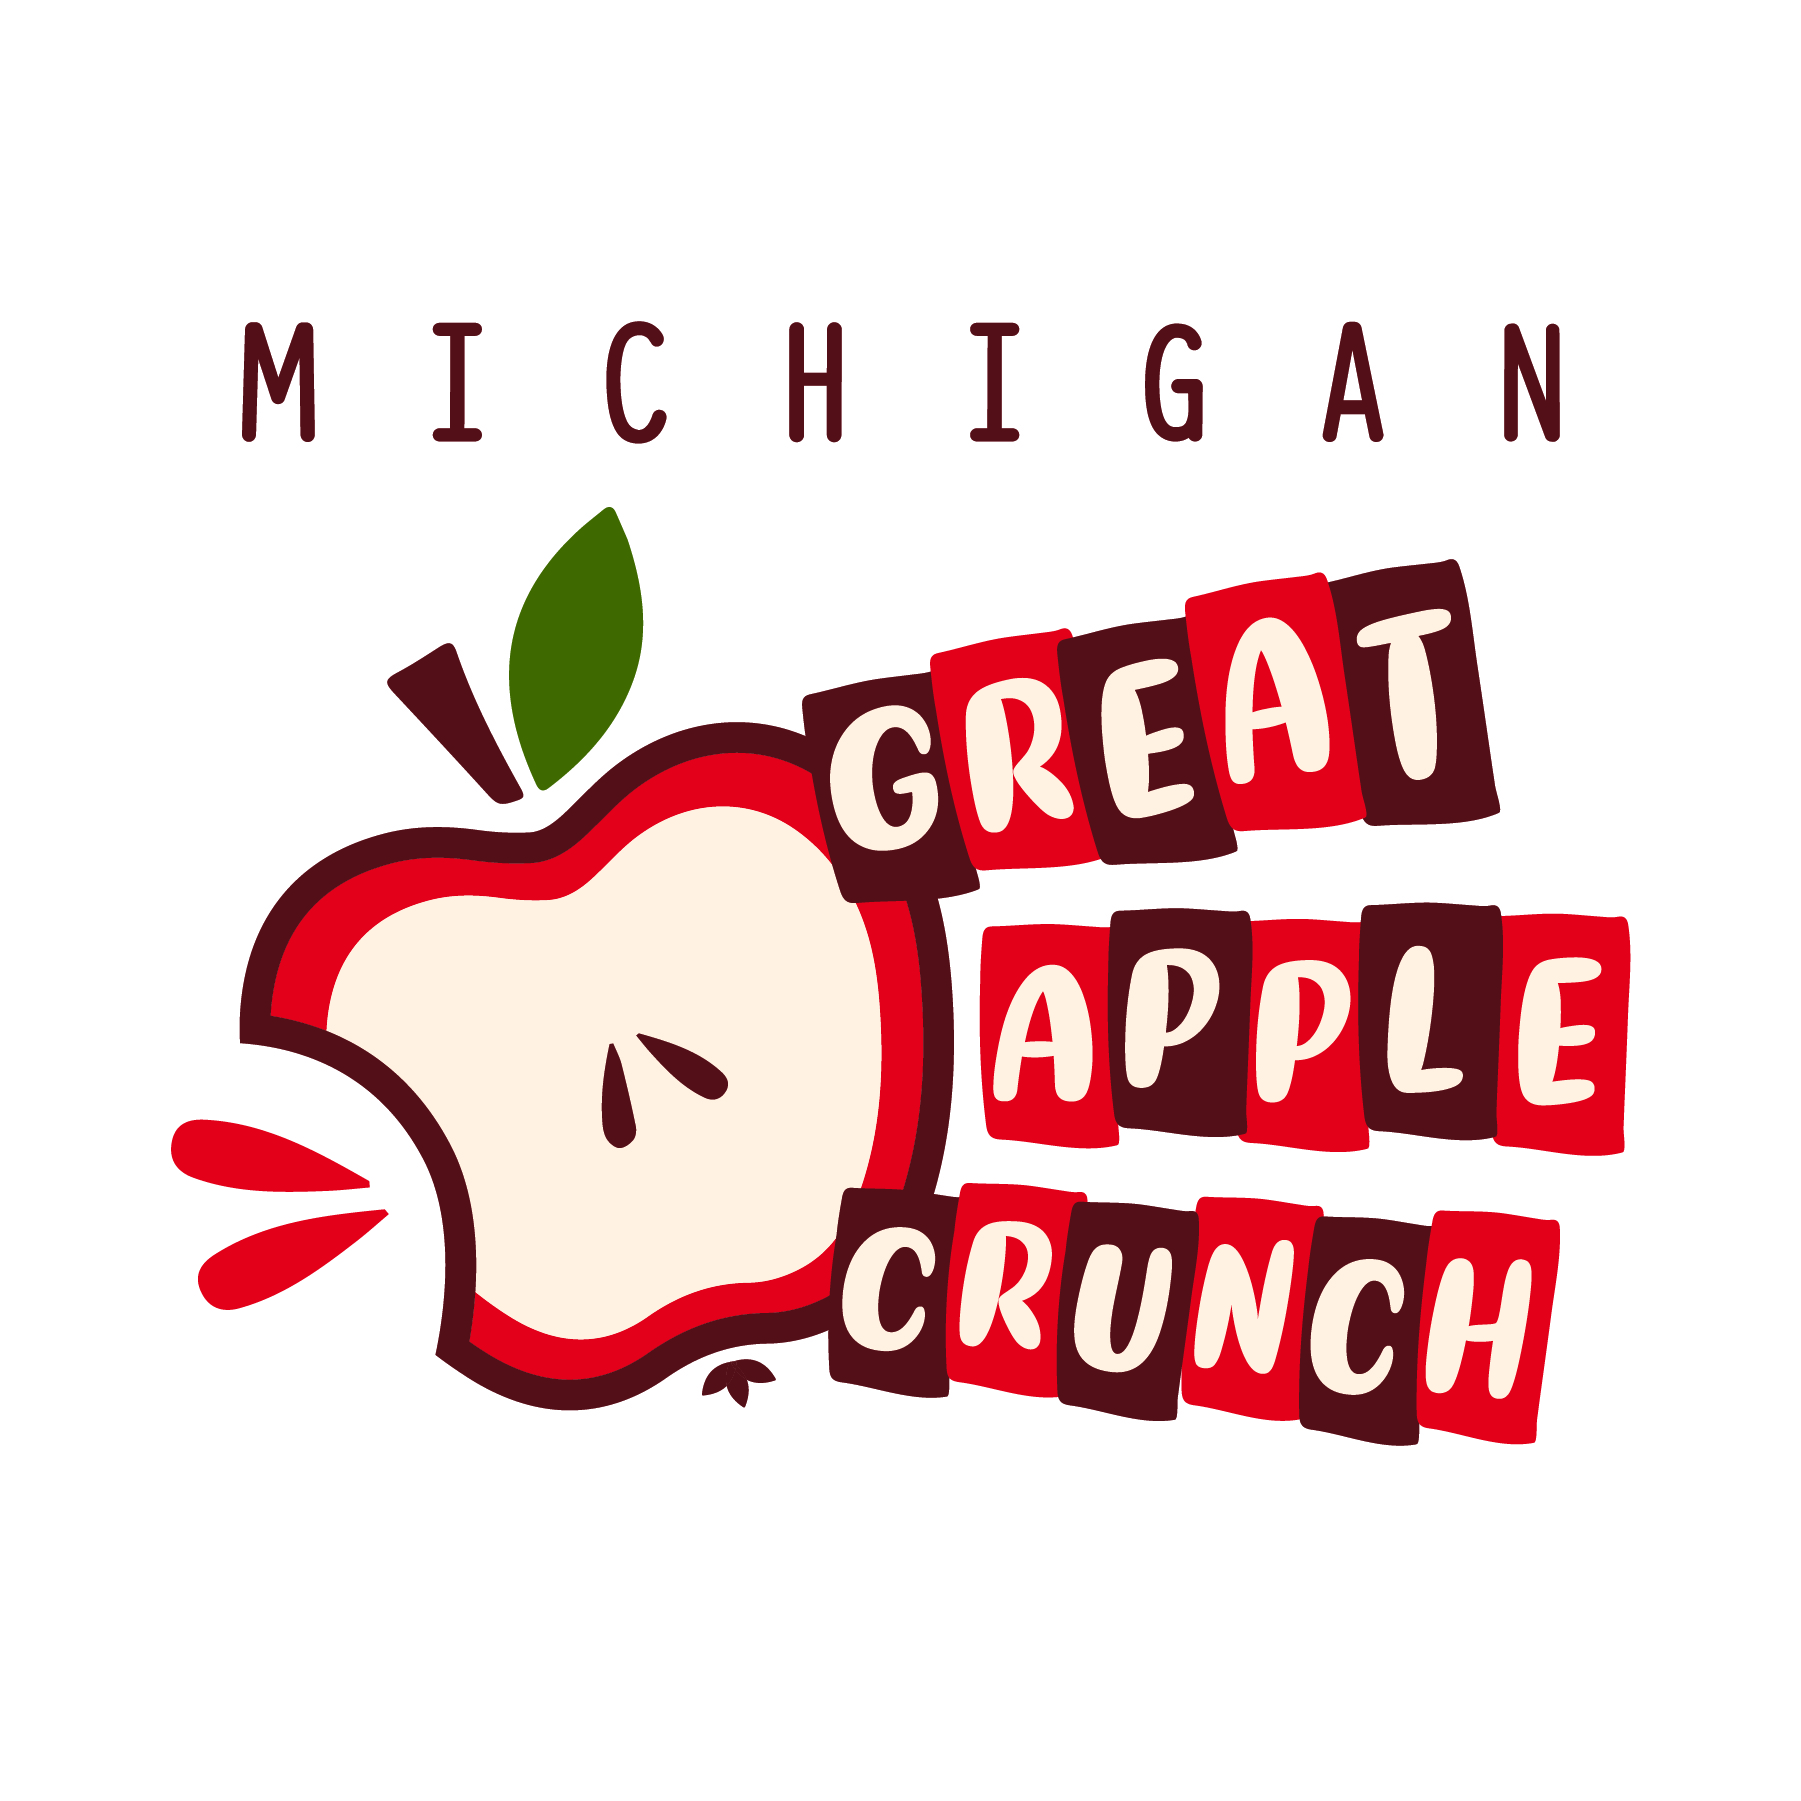 Ready, Set … CRUNCH a Great Lakes Apple!